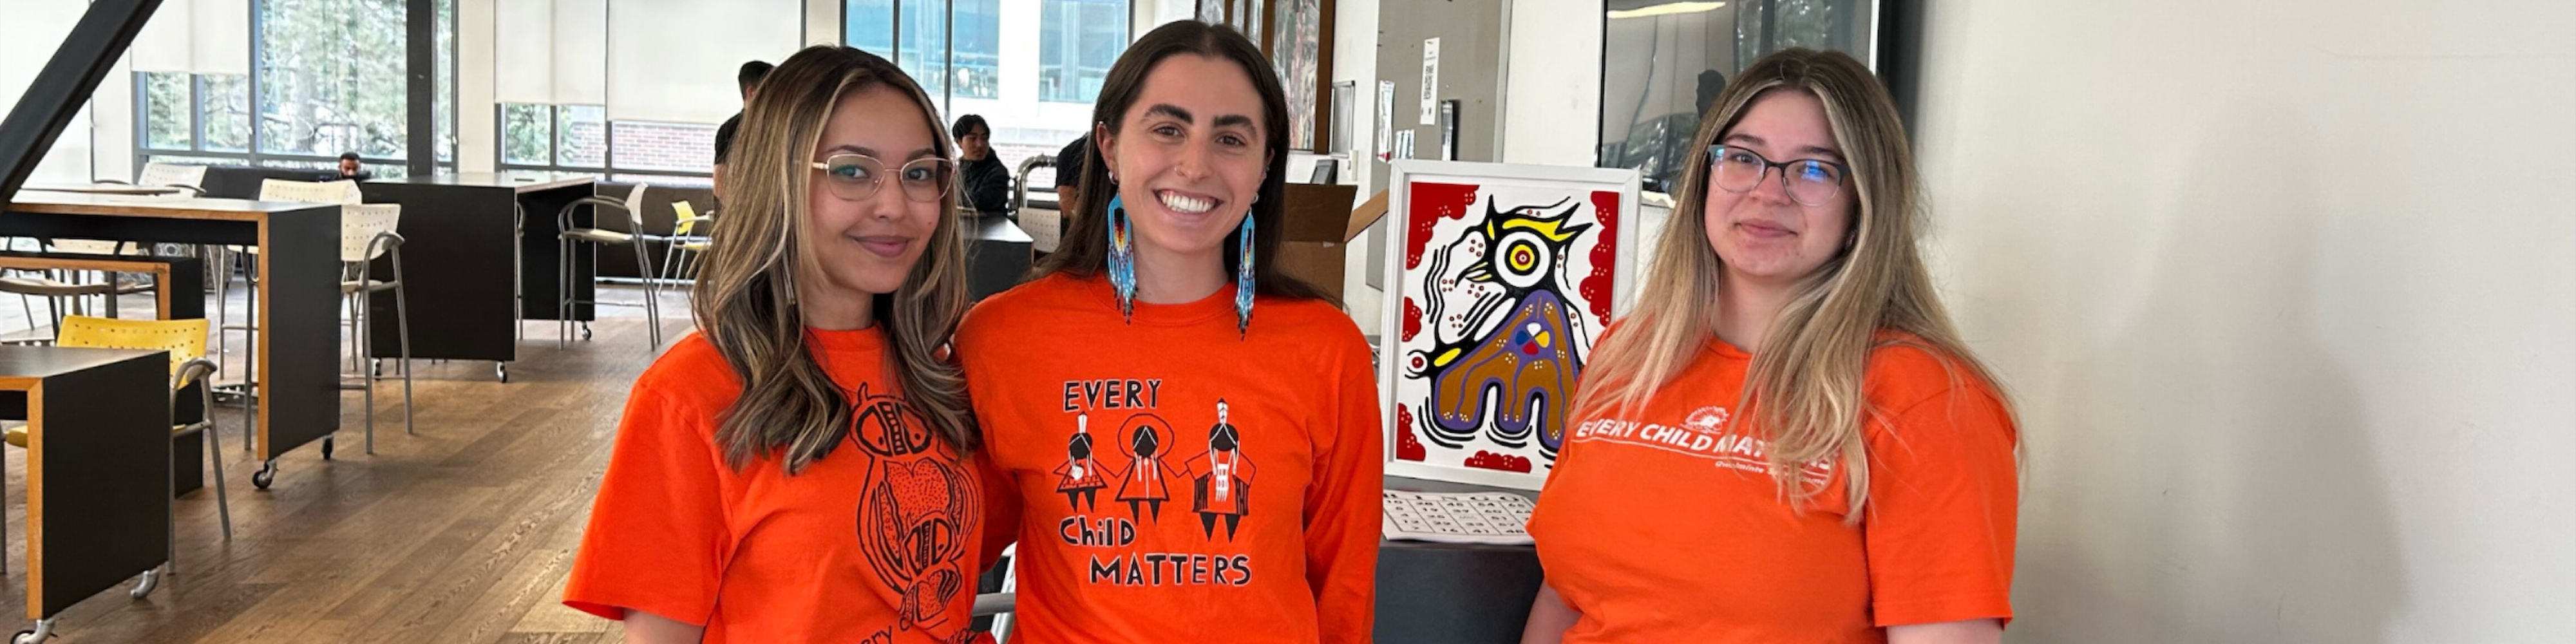 Three Osgoode Indigenous Students' Association Leaders in orange t-shirts for Orange Shirt Day.